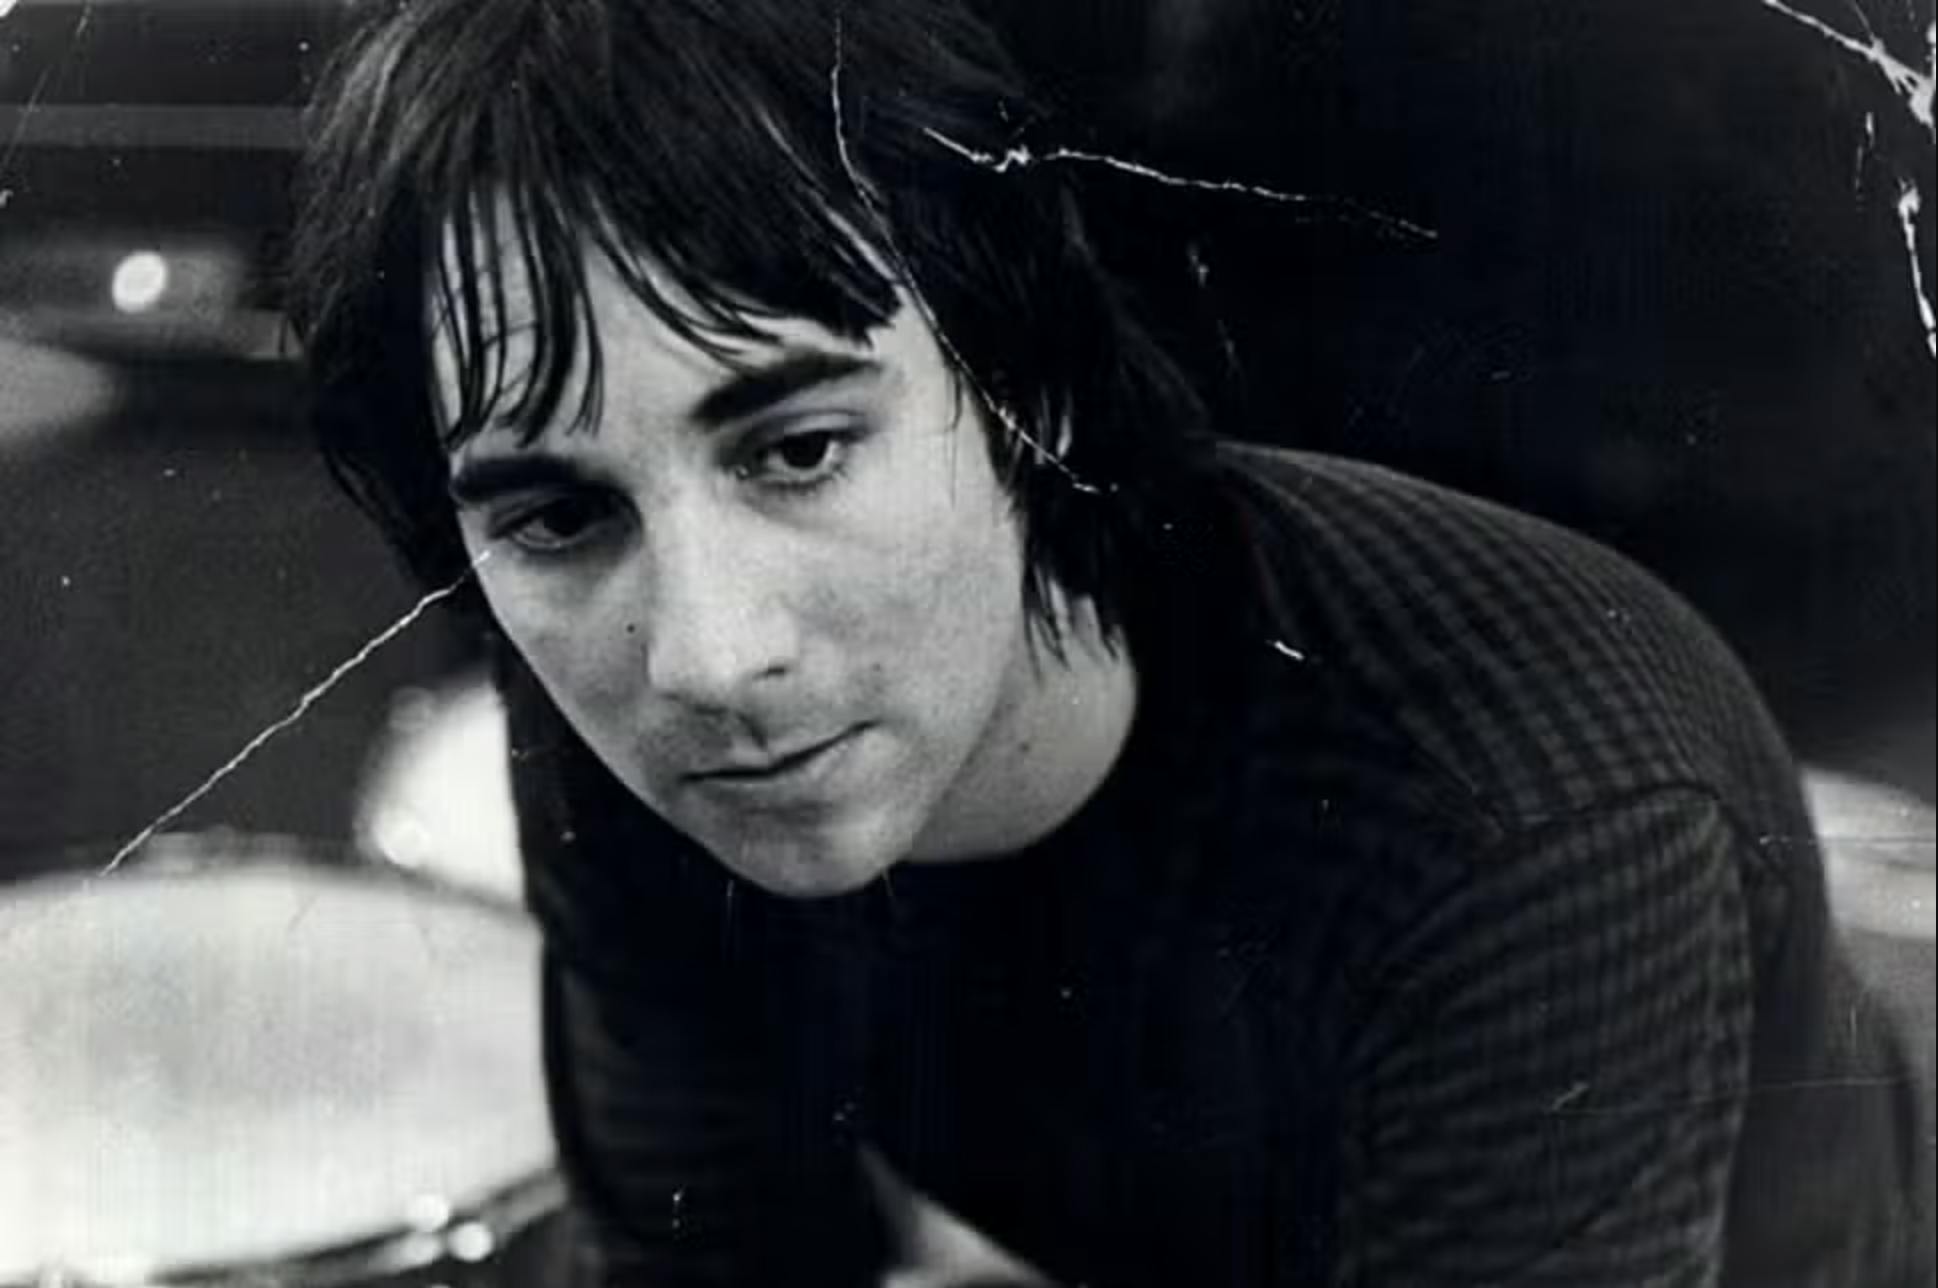 Keith Moon, drummer for The Who